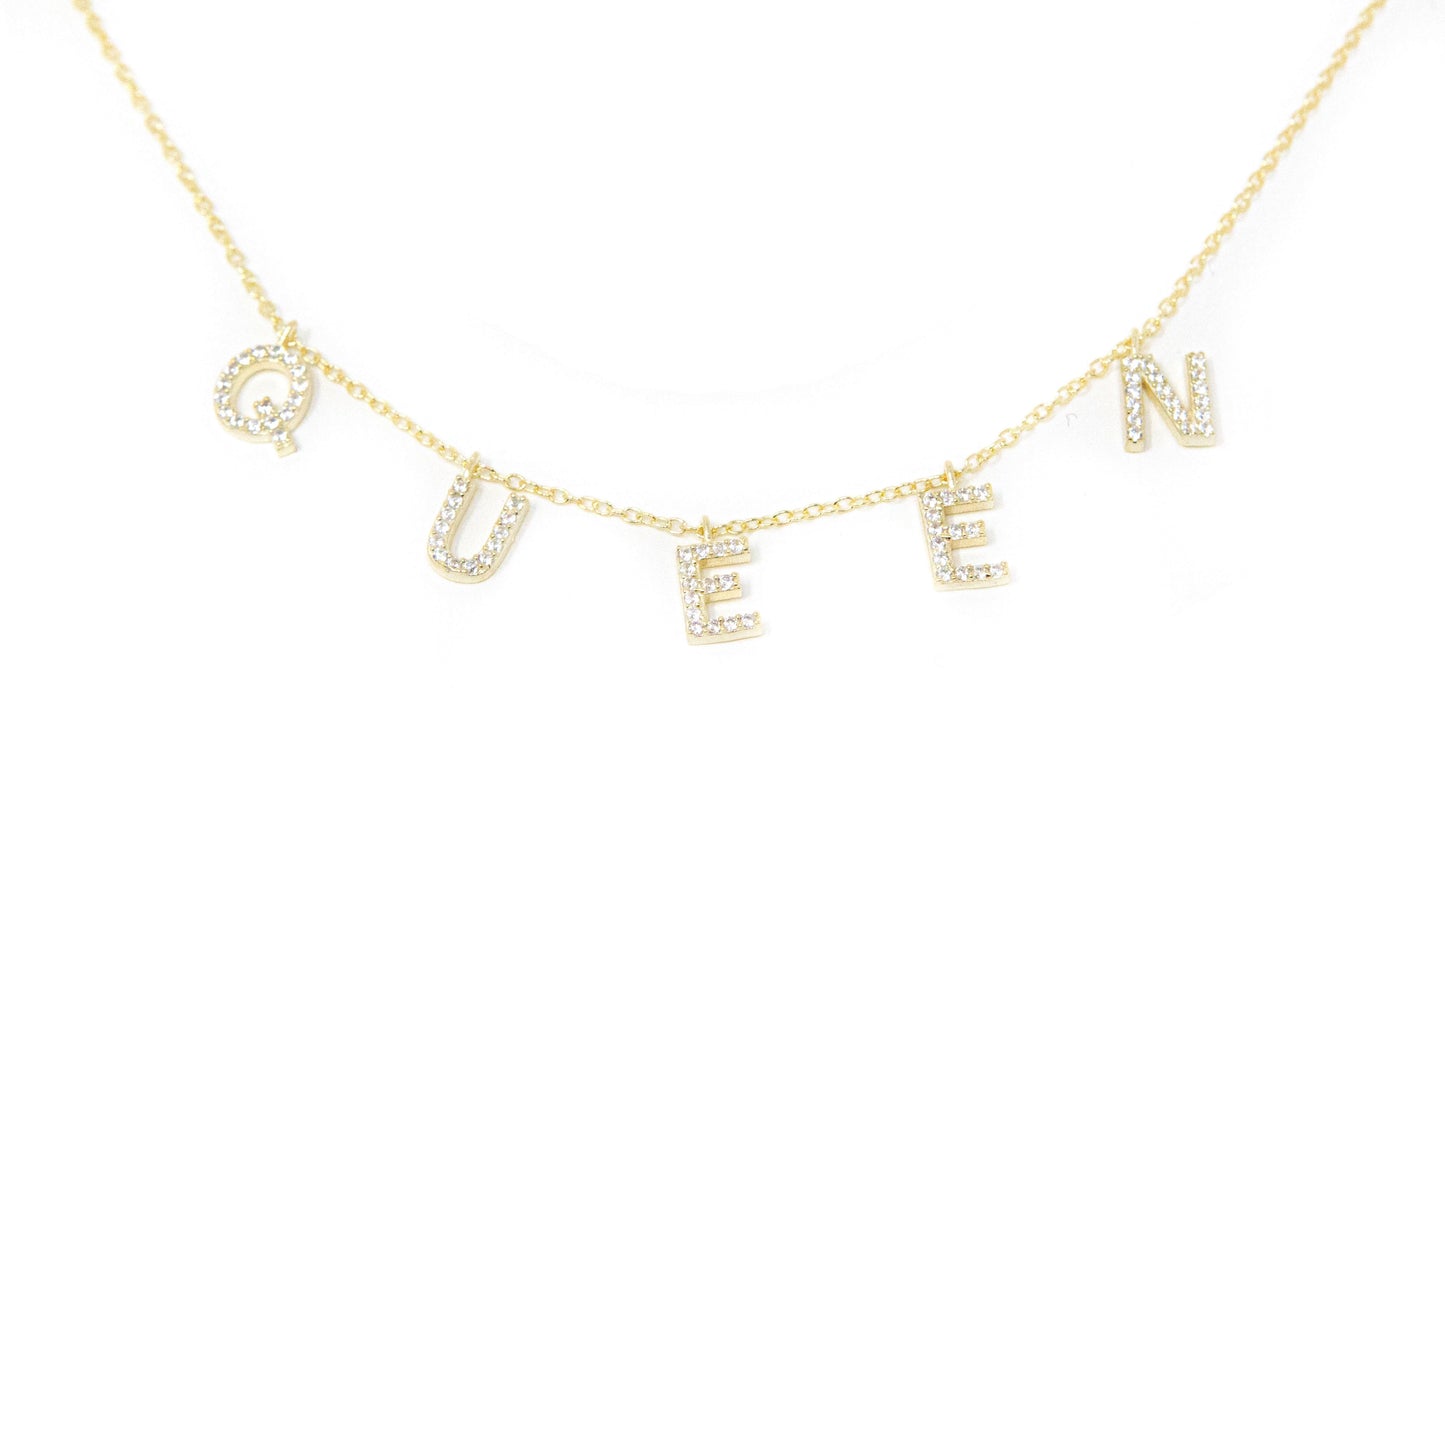 Ready To Ship It's All in a Name™ Necklace JEWELRY The Sis Kiss Queen Gold with Crystals